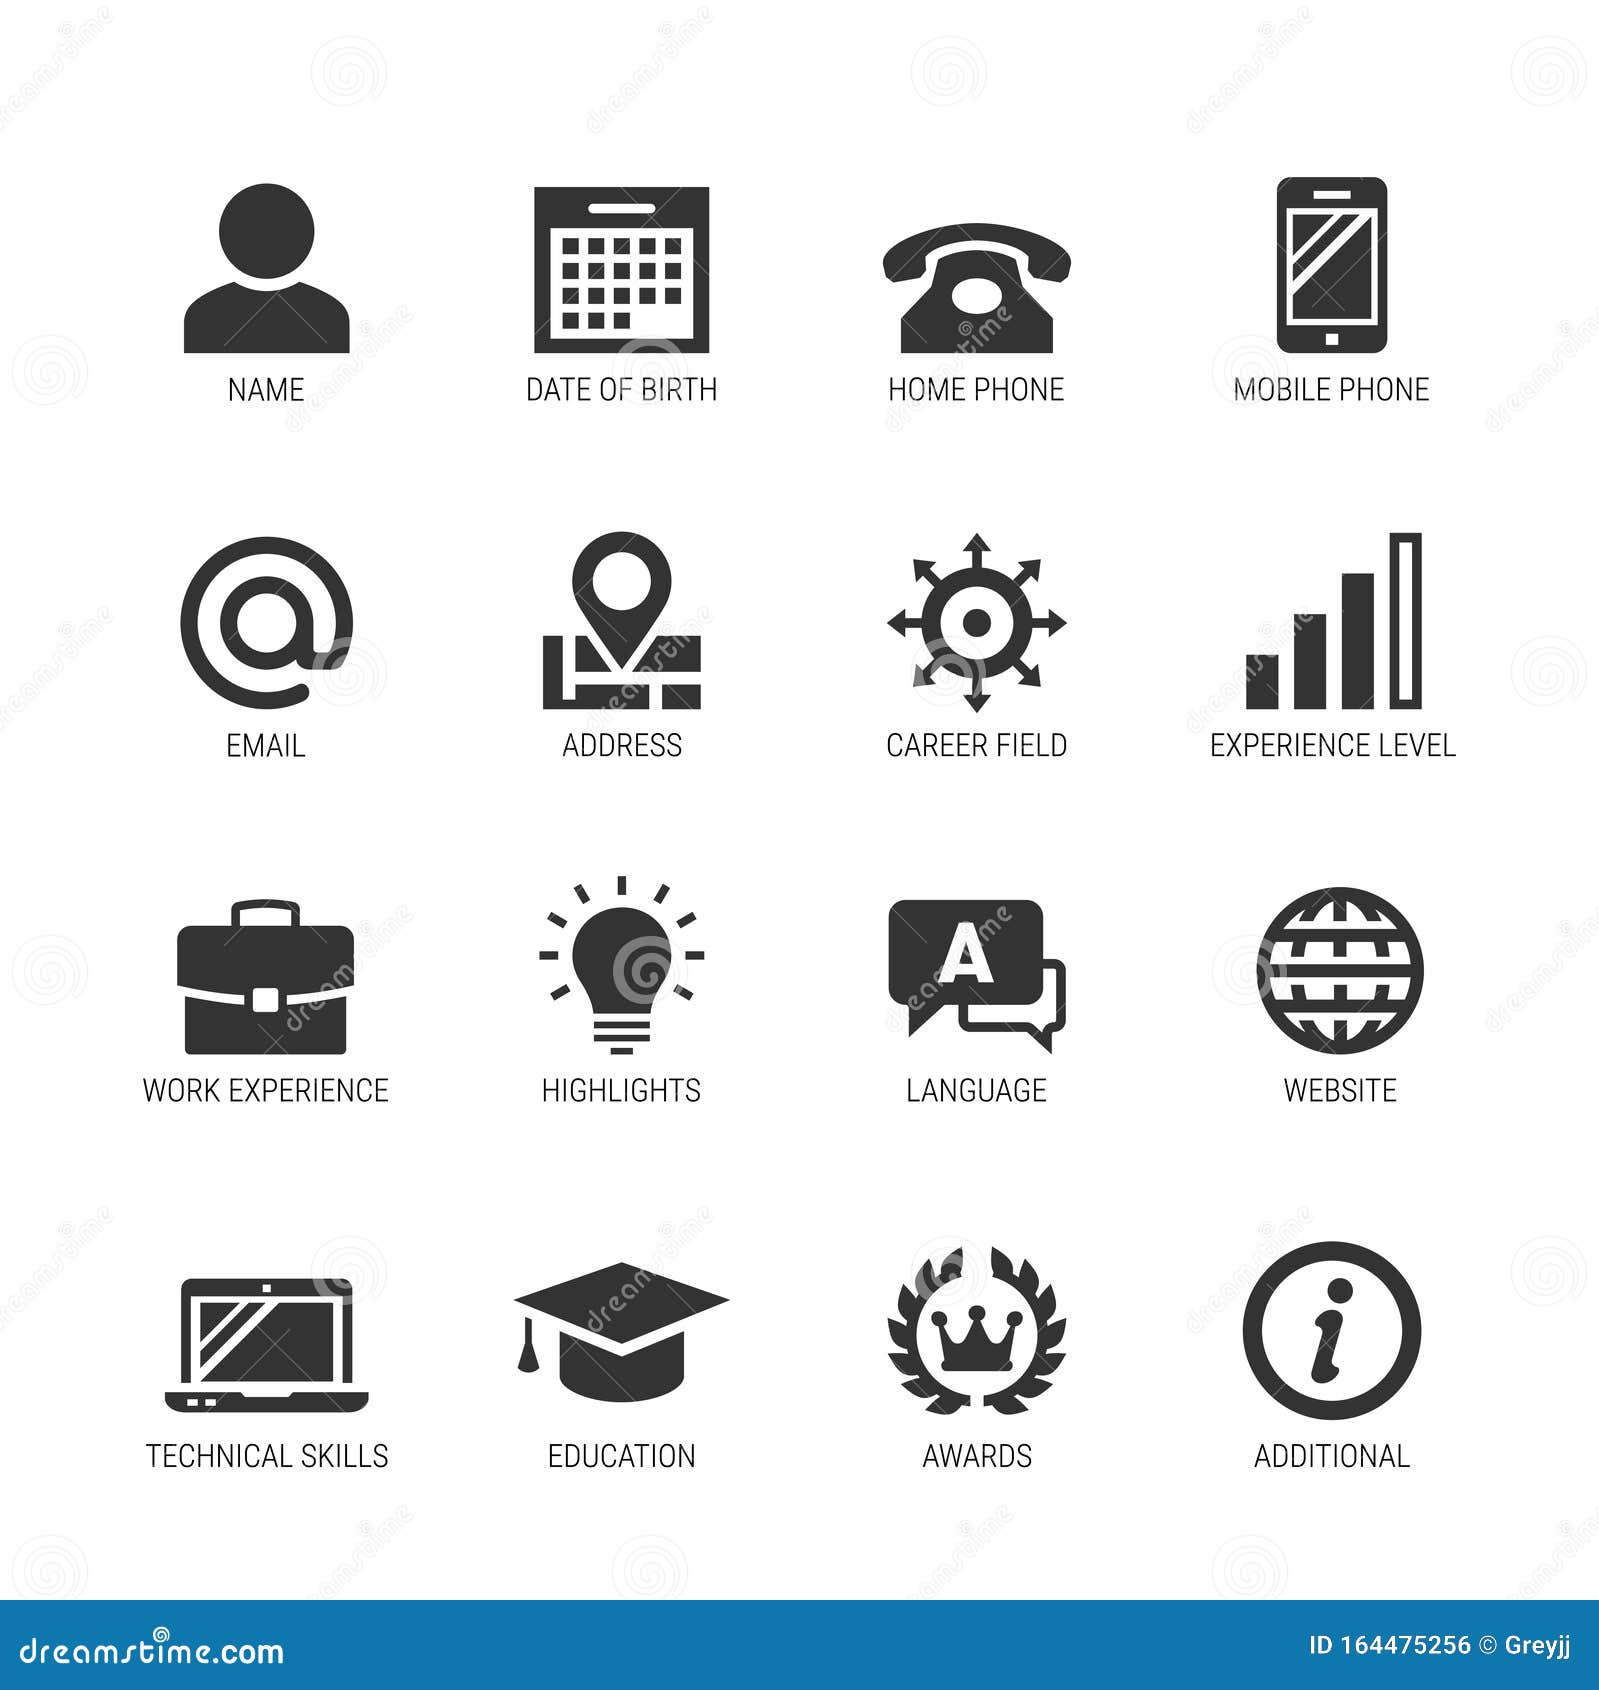 resume or curriculum vitae related icons